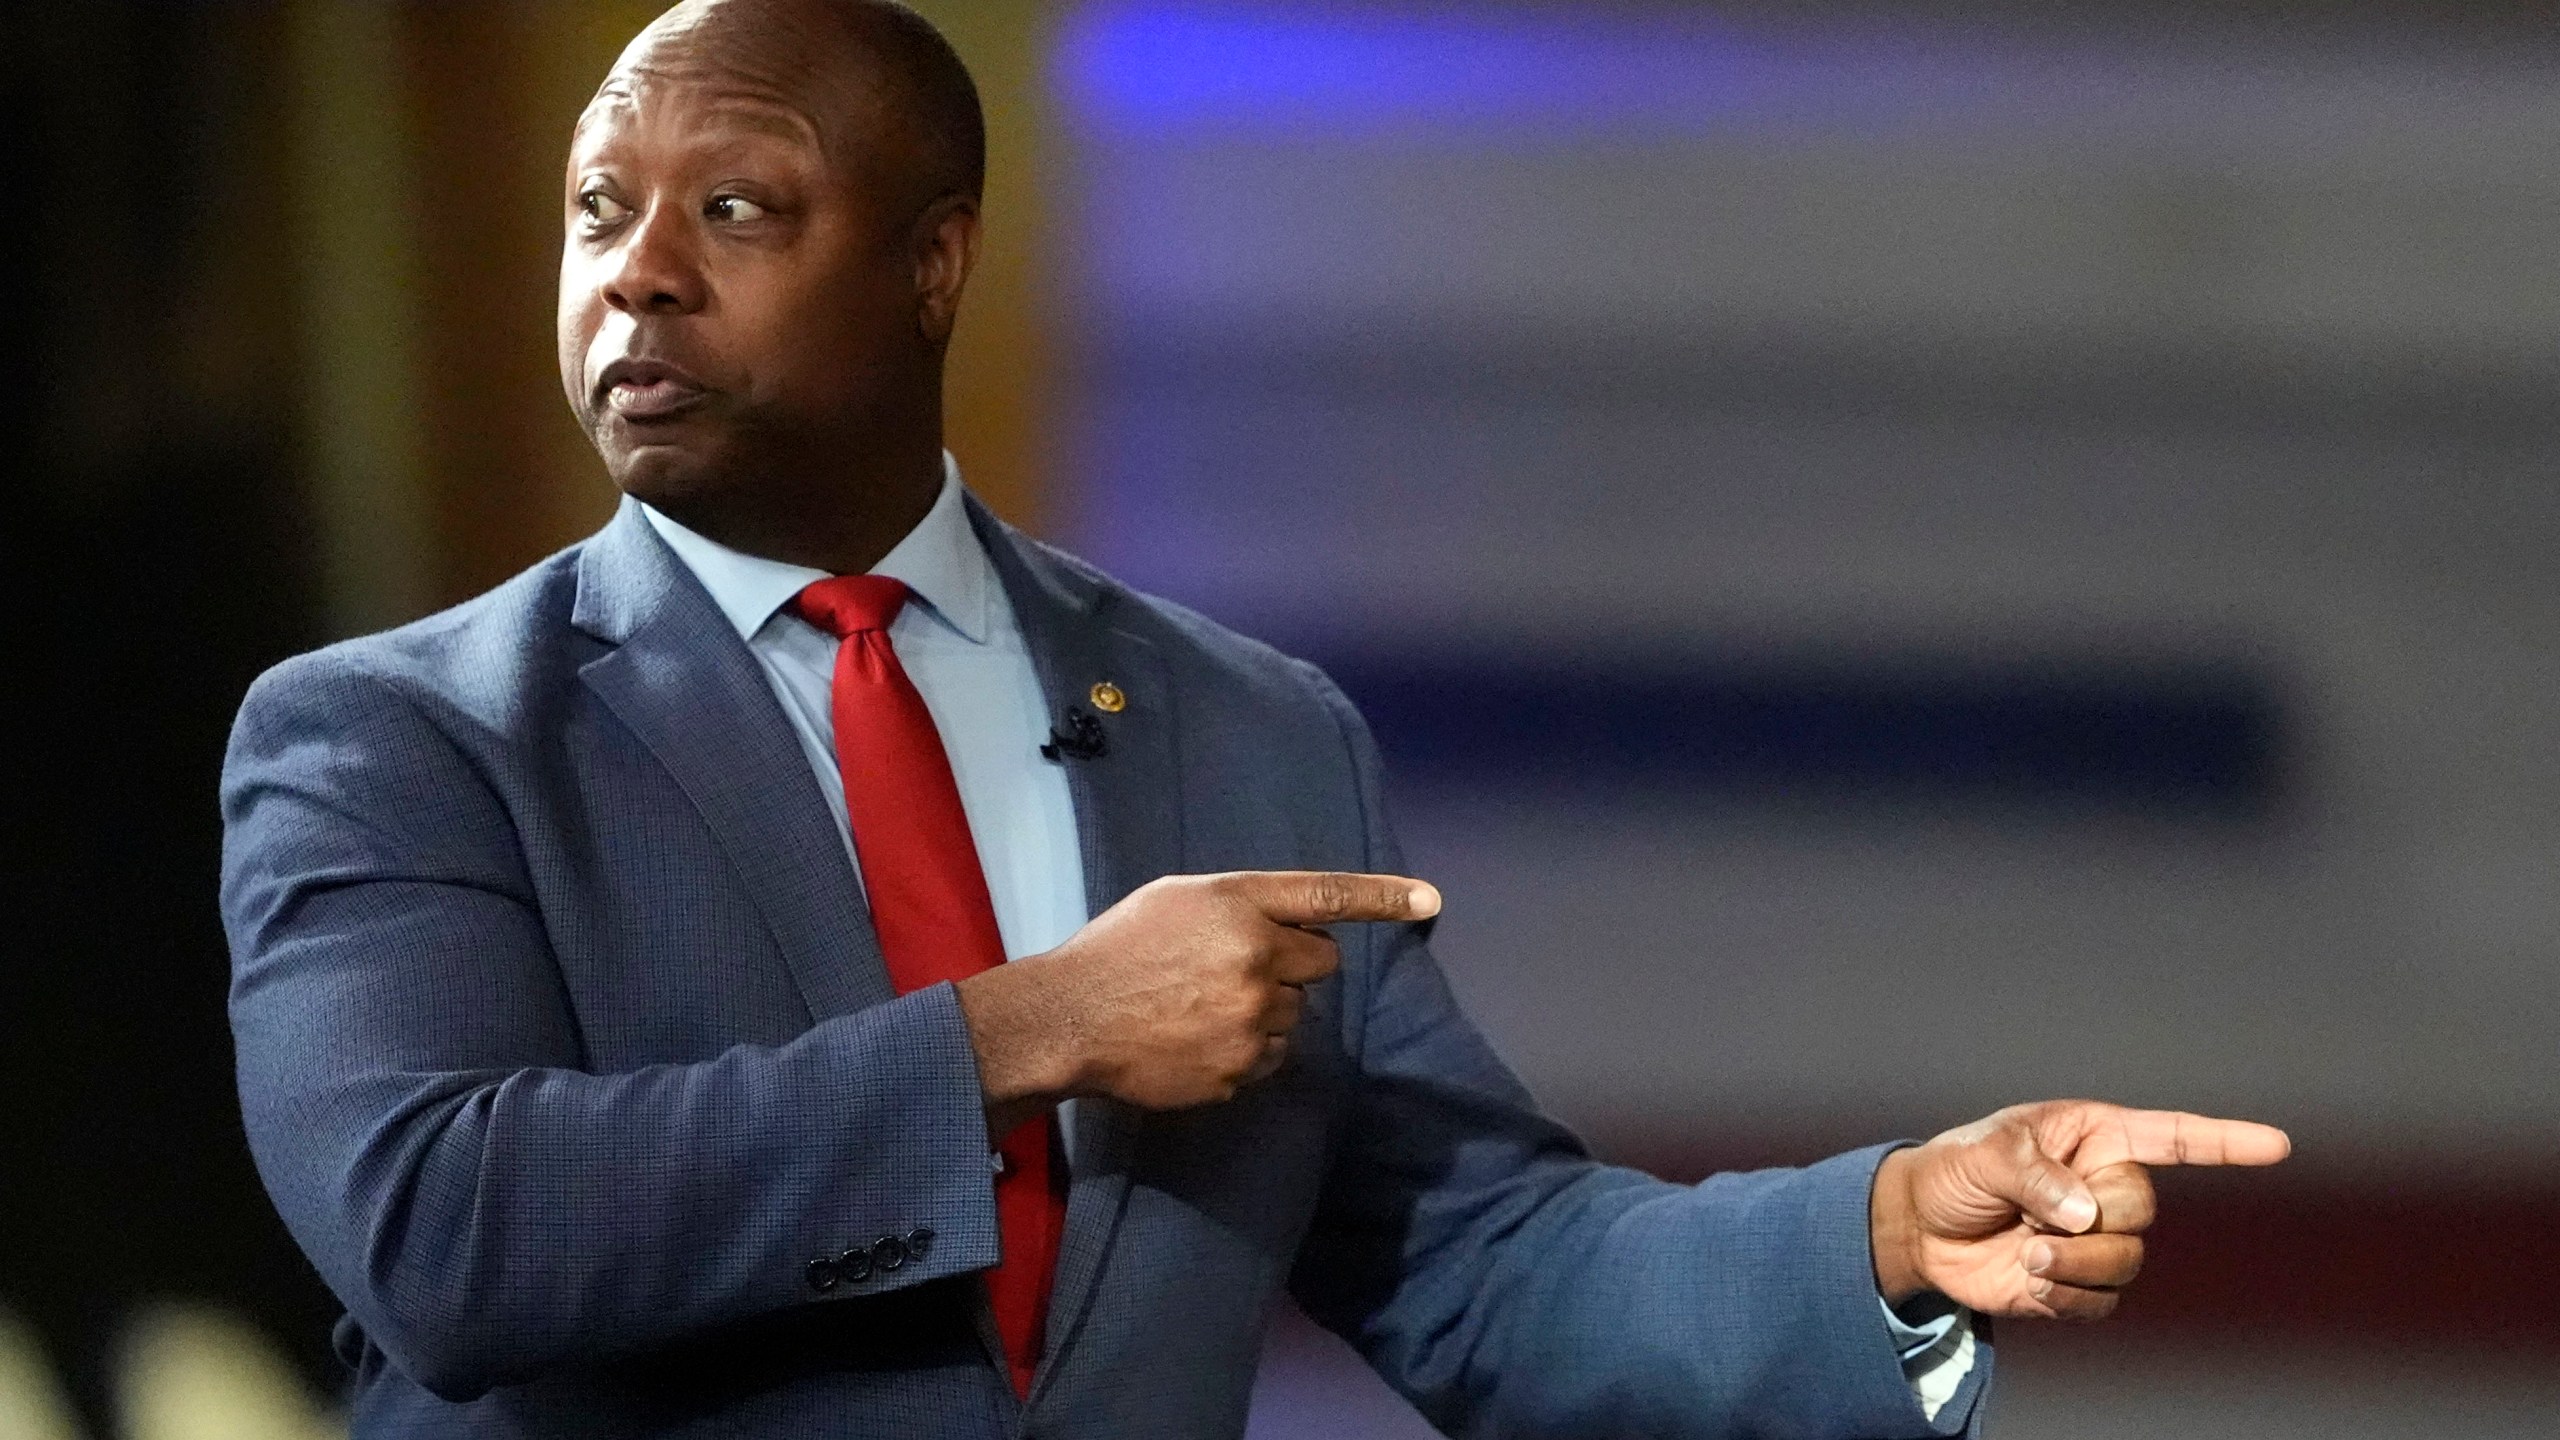 Sen. Tim Scott, R-S.C., points to Republican presidential candidate former President Donald Trump during a Fox News Channel town hall Tuesday, Feb. 20, 2024, in Greenville, S.C. (AP Photo/Chris Carlson)